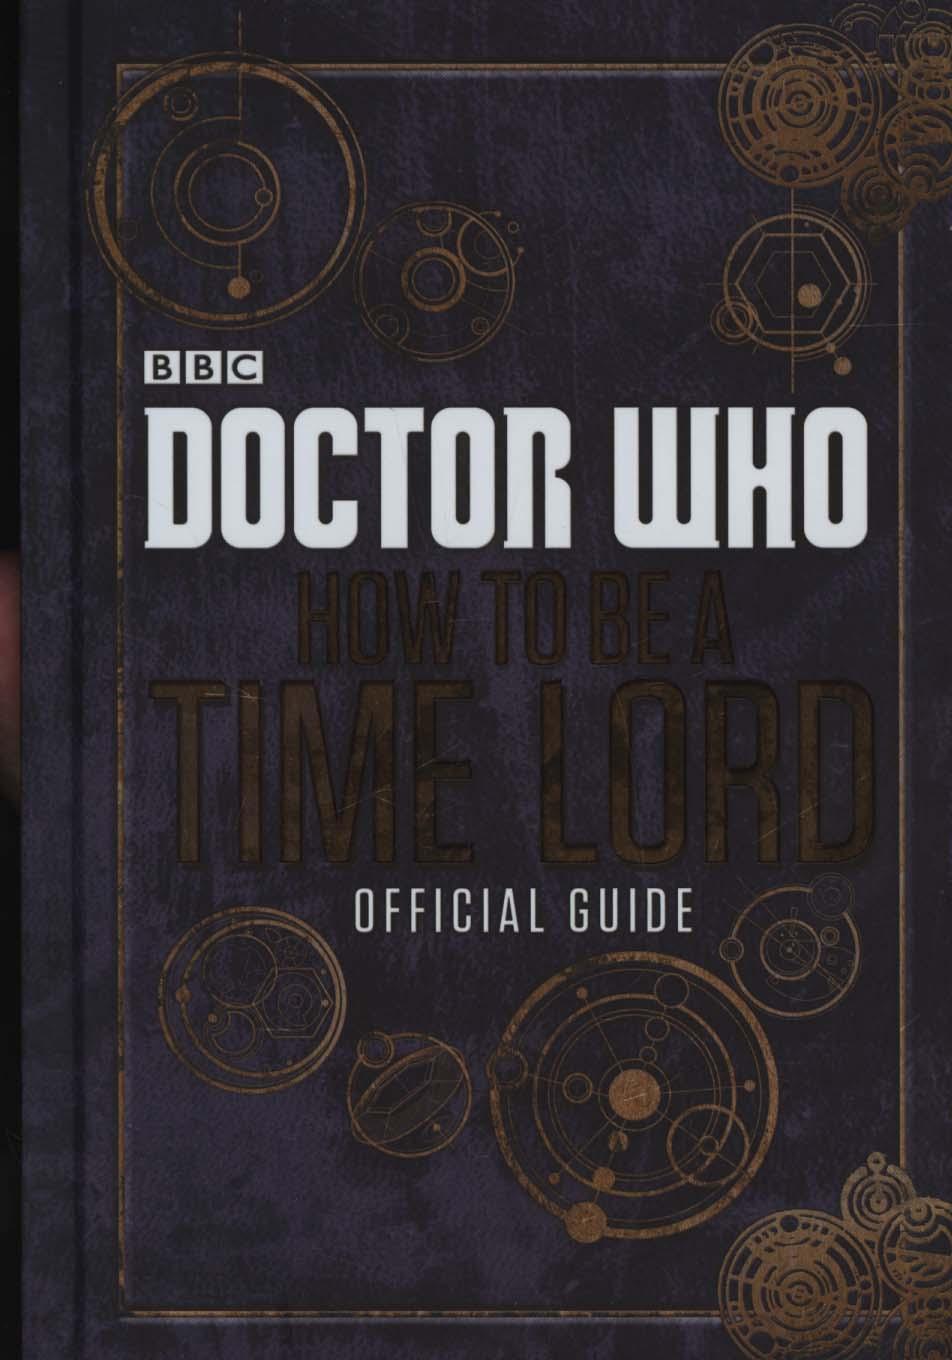 Doctor Who: How to be a Time Lord - The Official Guide -  